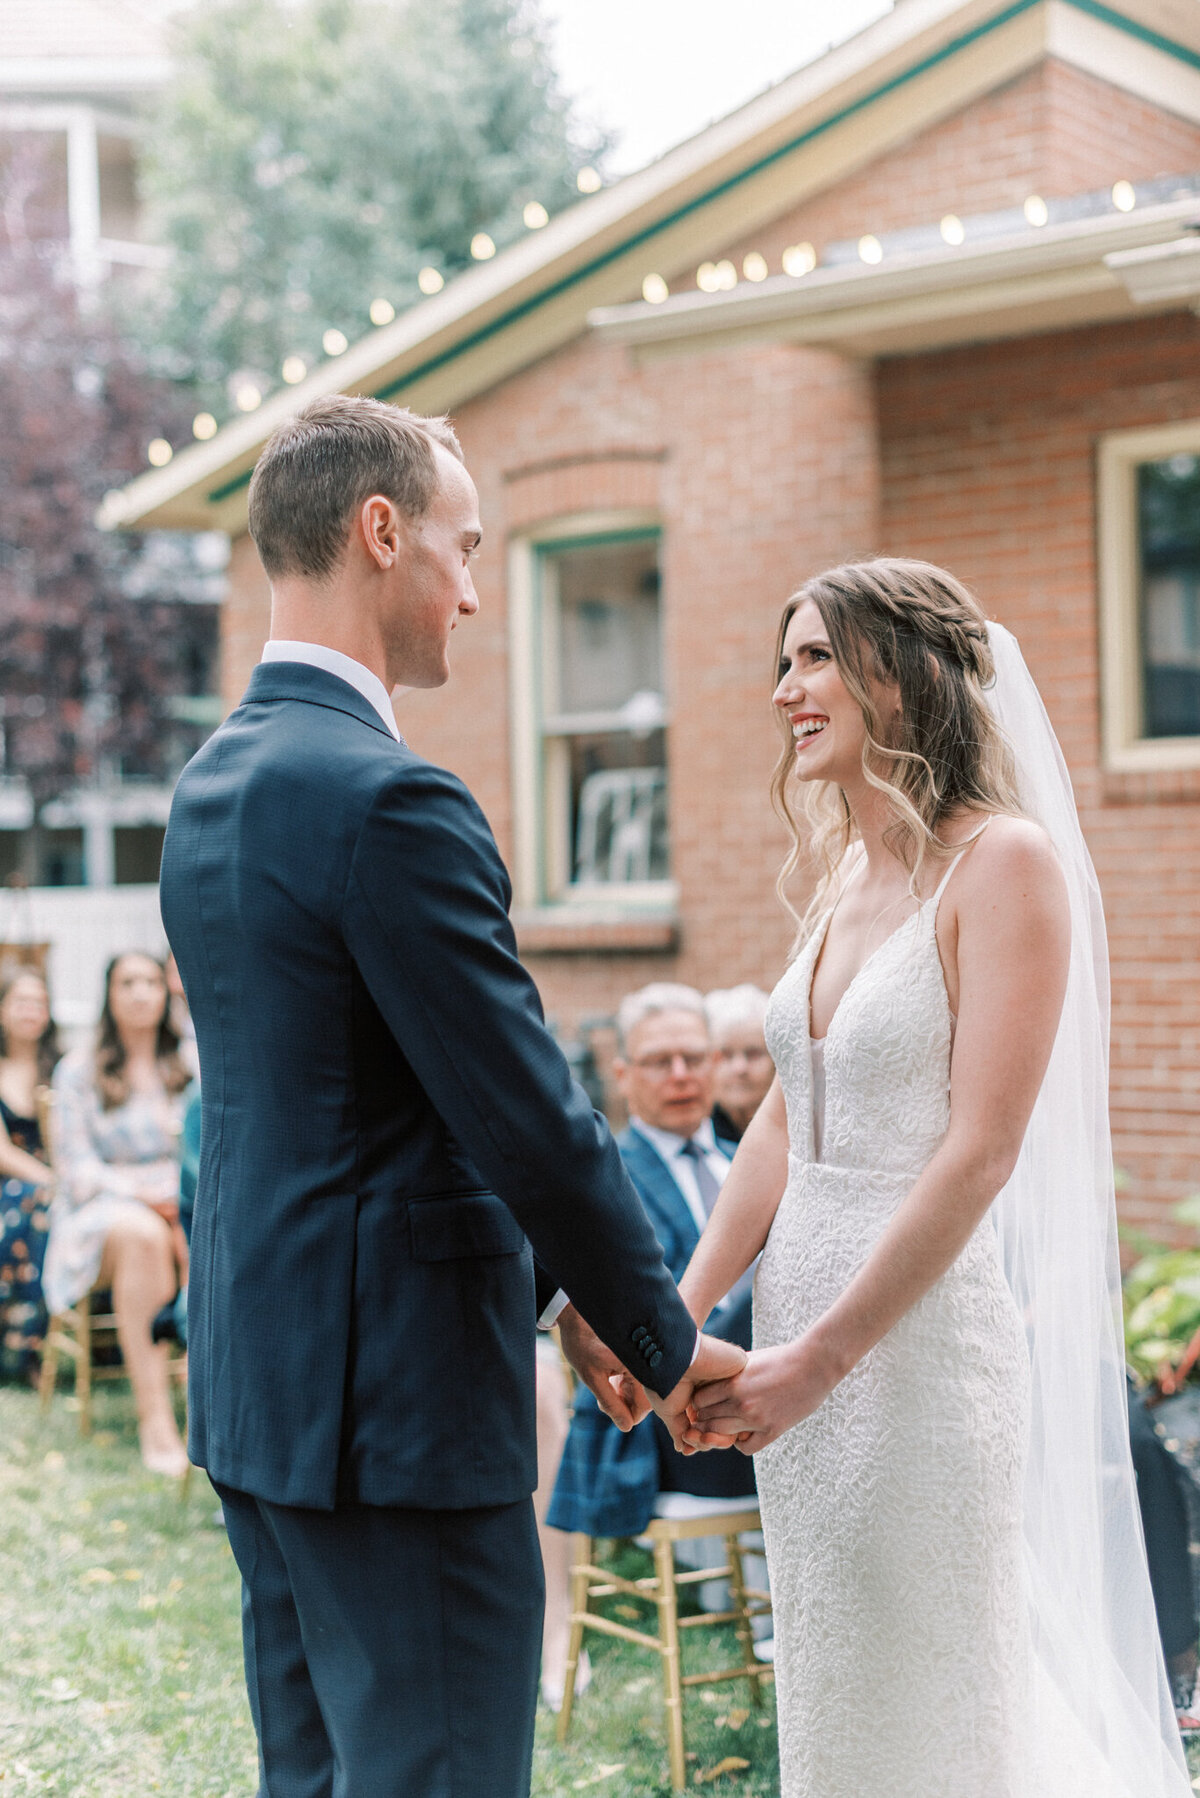 Bride smiling at her groom during outdoor wedding ceremony captured by Pam Kriangkum Photography, fine art, classic wedding photographer in Edmonton, Alberta. Featured on the Bronte Bride Vendor Guide.